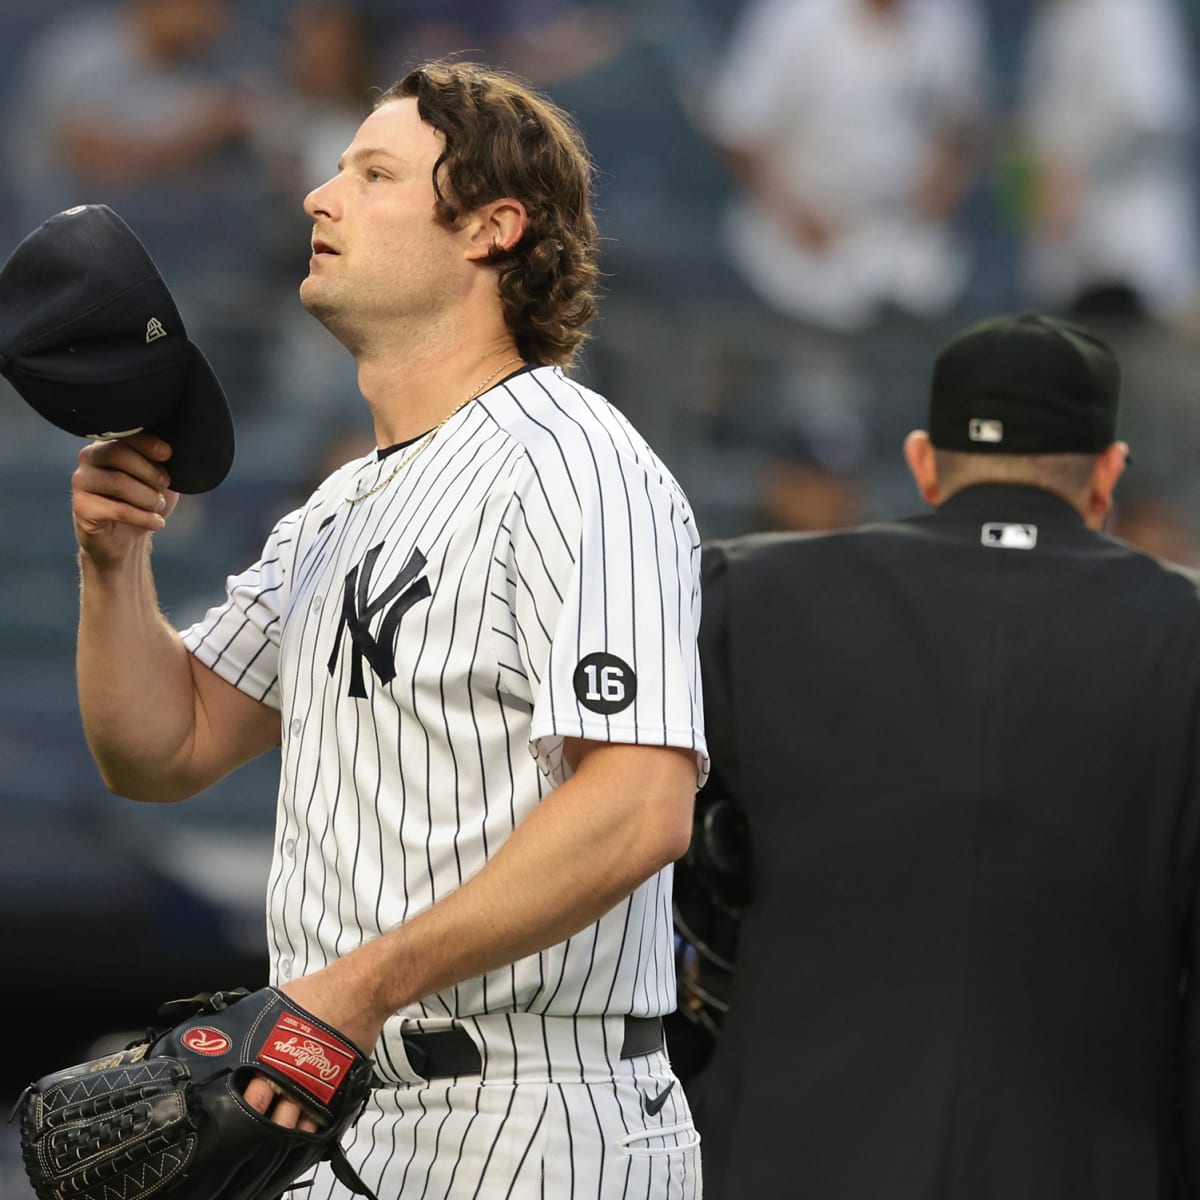 Hey baseball fans, your New York Yankees' Gerrit Cole jerseys are in! 